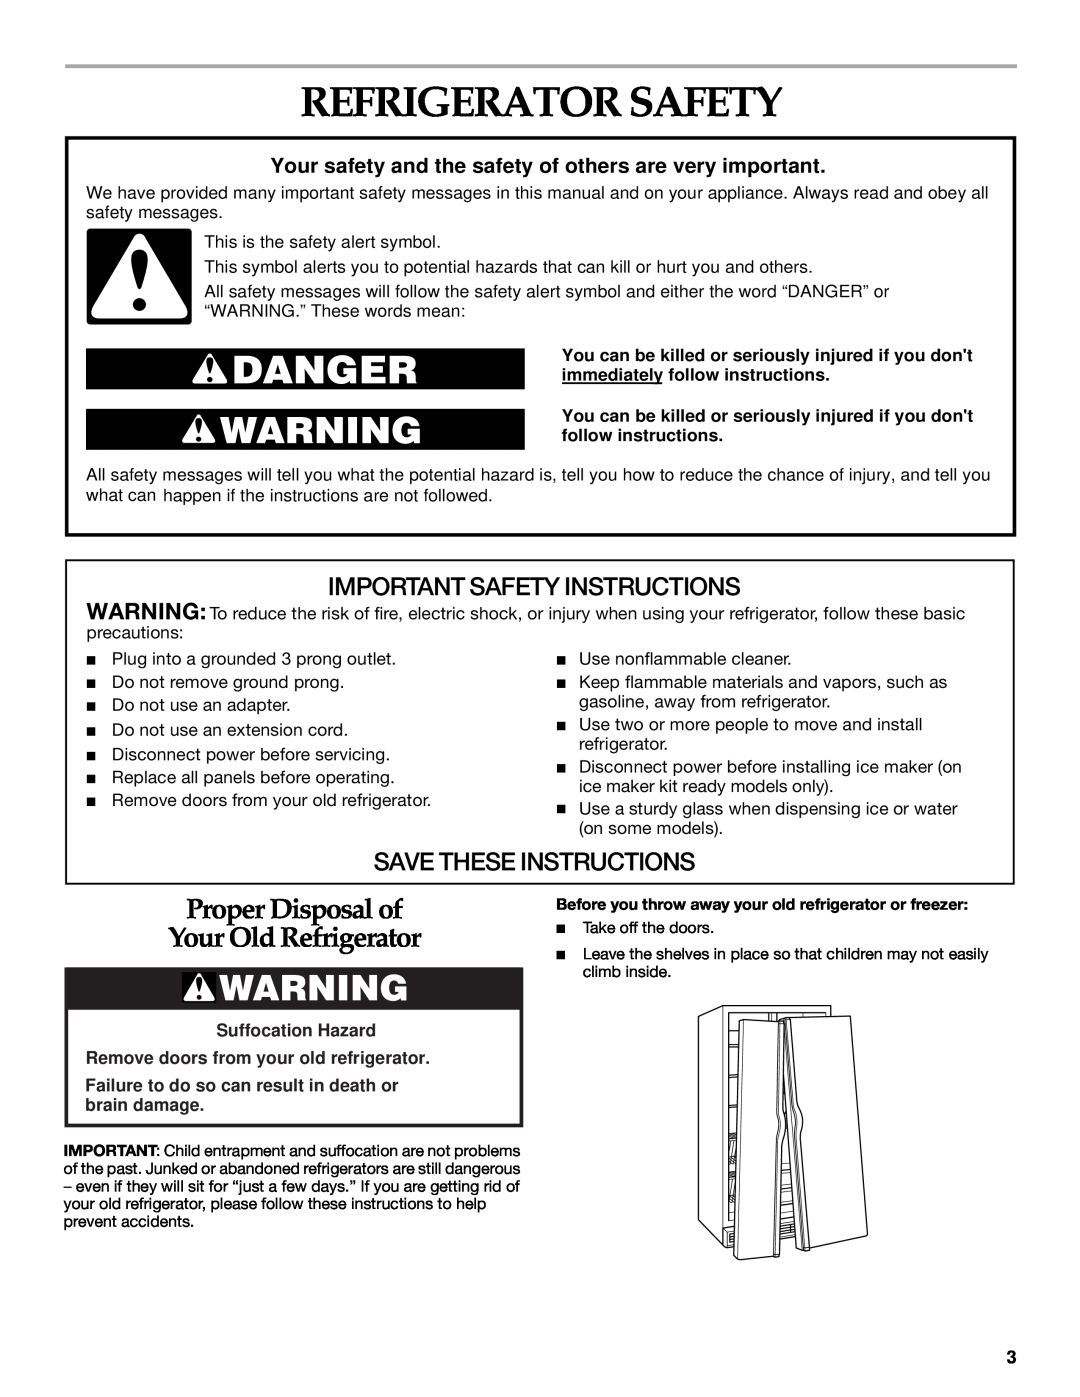 Whirlpool WF-NL500, WF-NL300 Refrigerator Safety, Proper Disposal of Your Old Refrigerator, Important Safety Instructions 